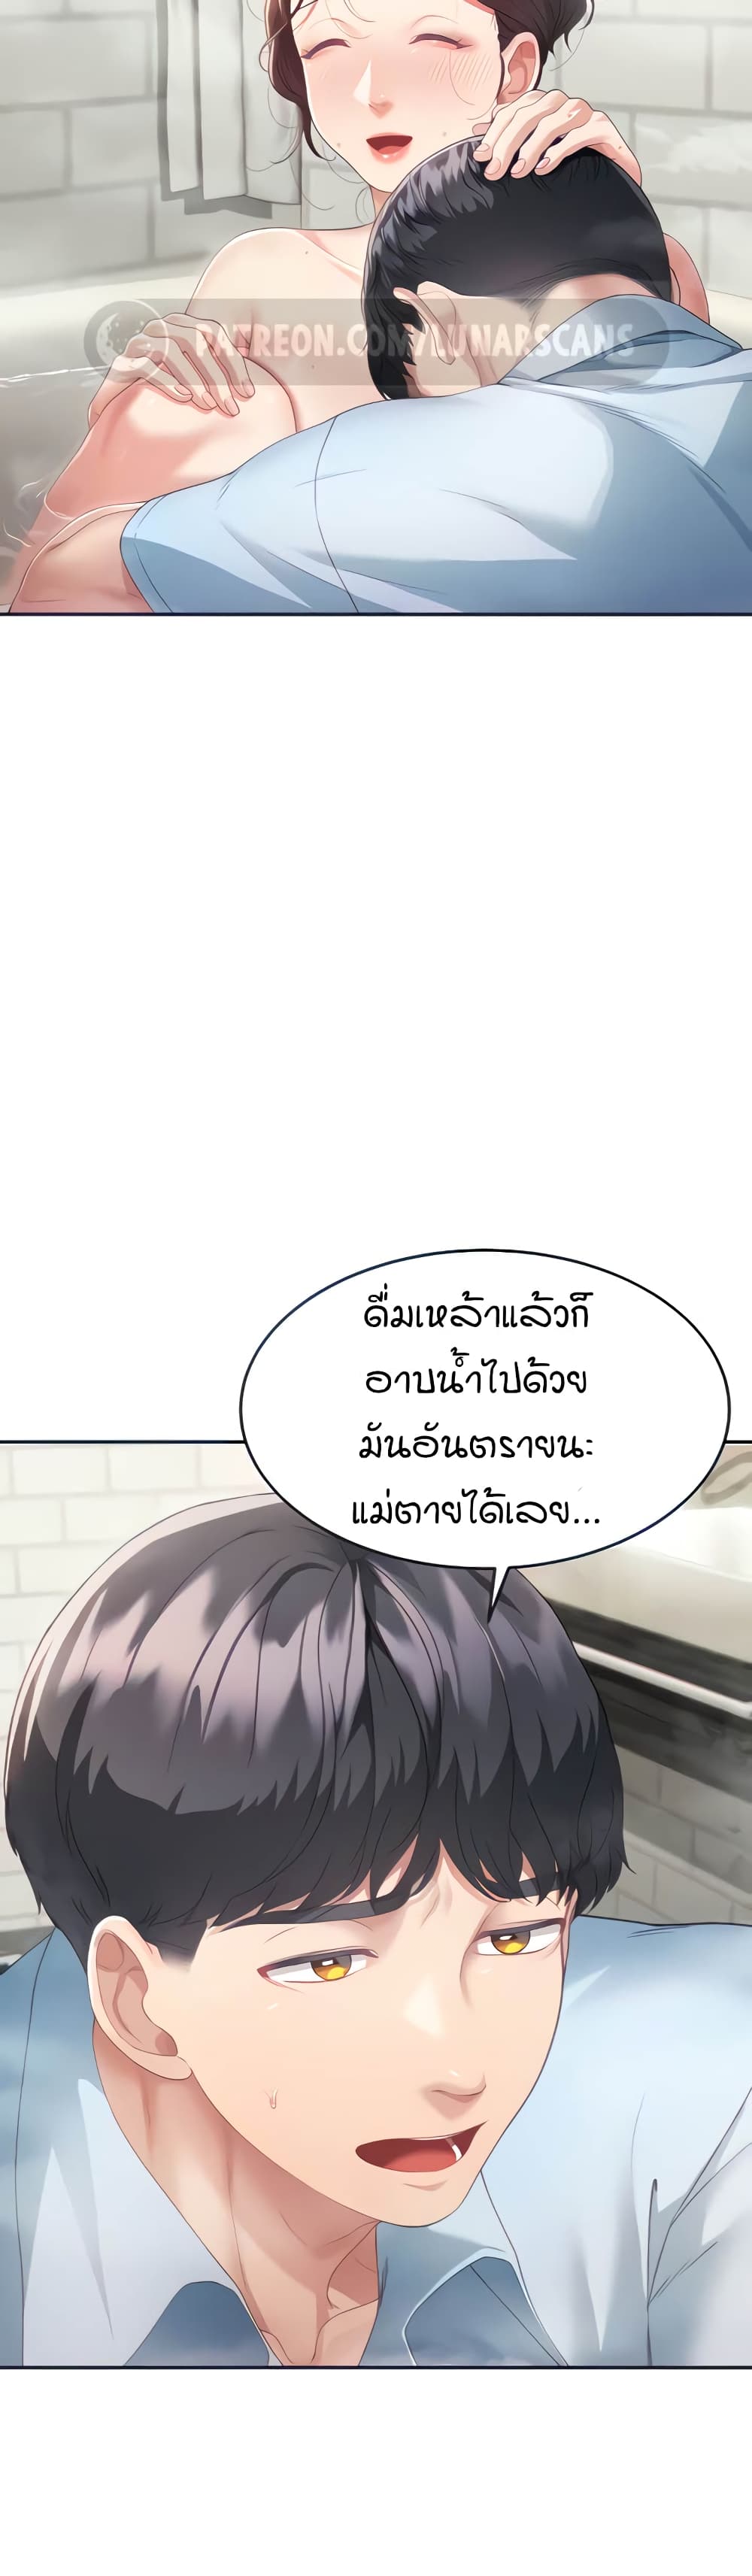 Is It Your Mother or Sister? ตอนที่ 4 ภาพ 6